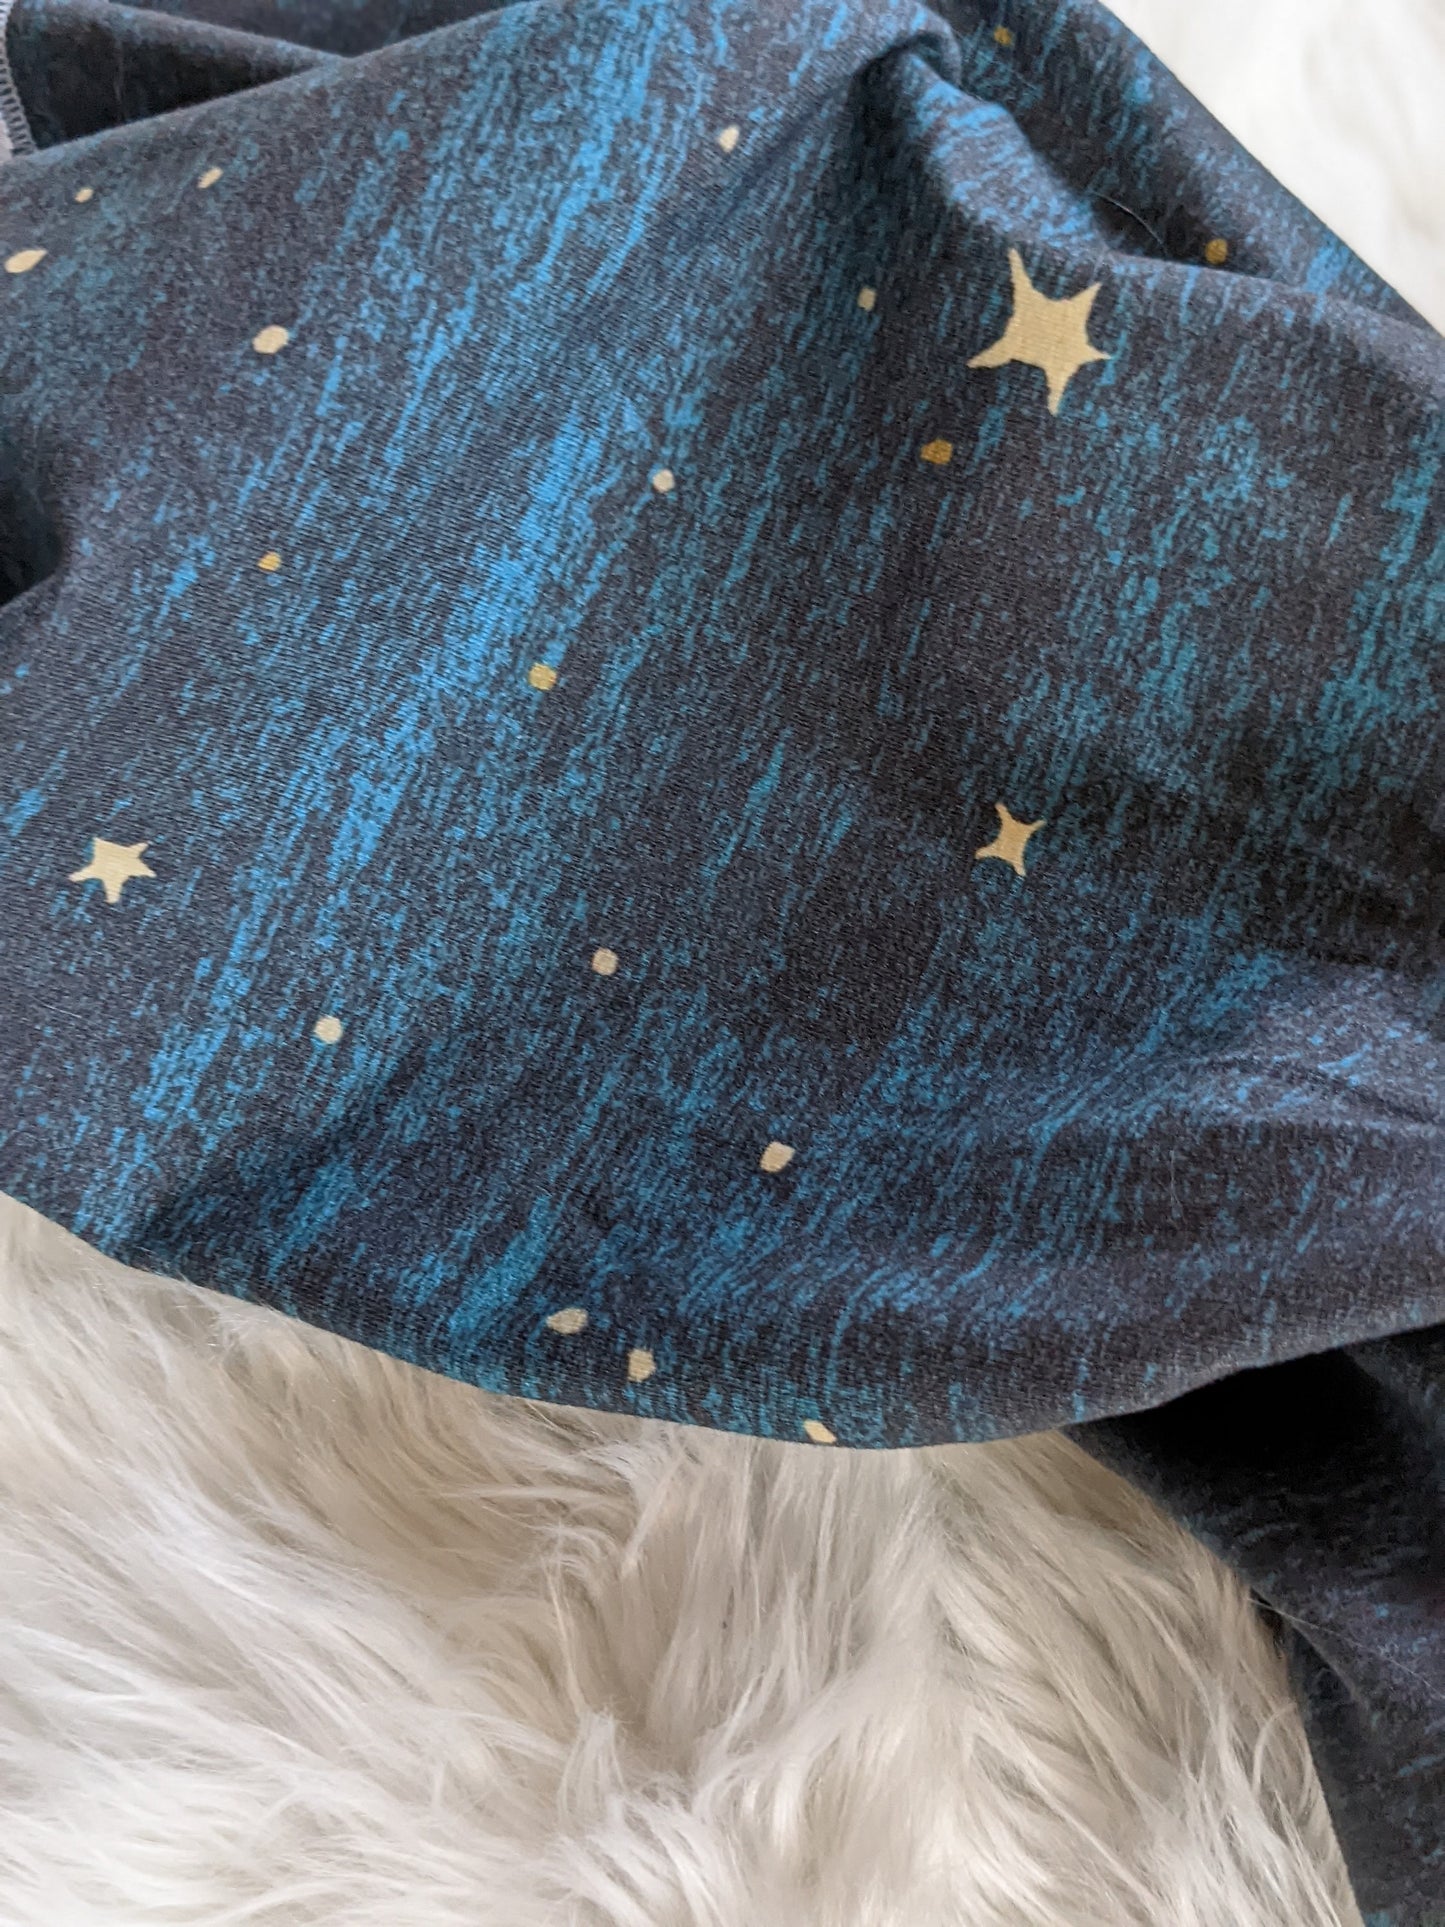 Midnight Teal Blue Space Star Baby Set Blanket BeanieHeadband Swaddle Nursing Cover - Hospital Going Home Outfit